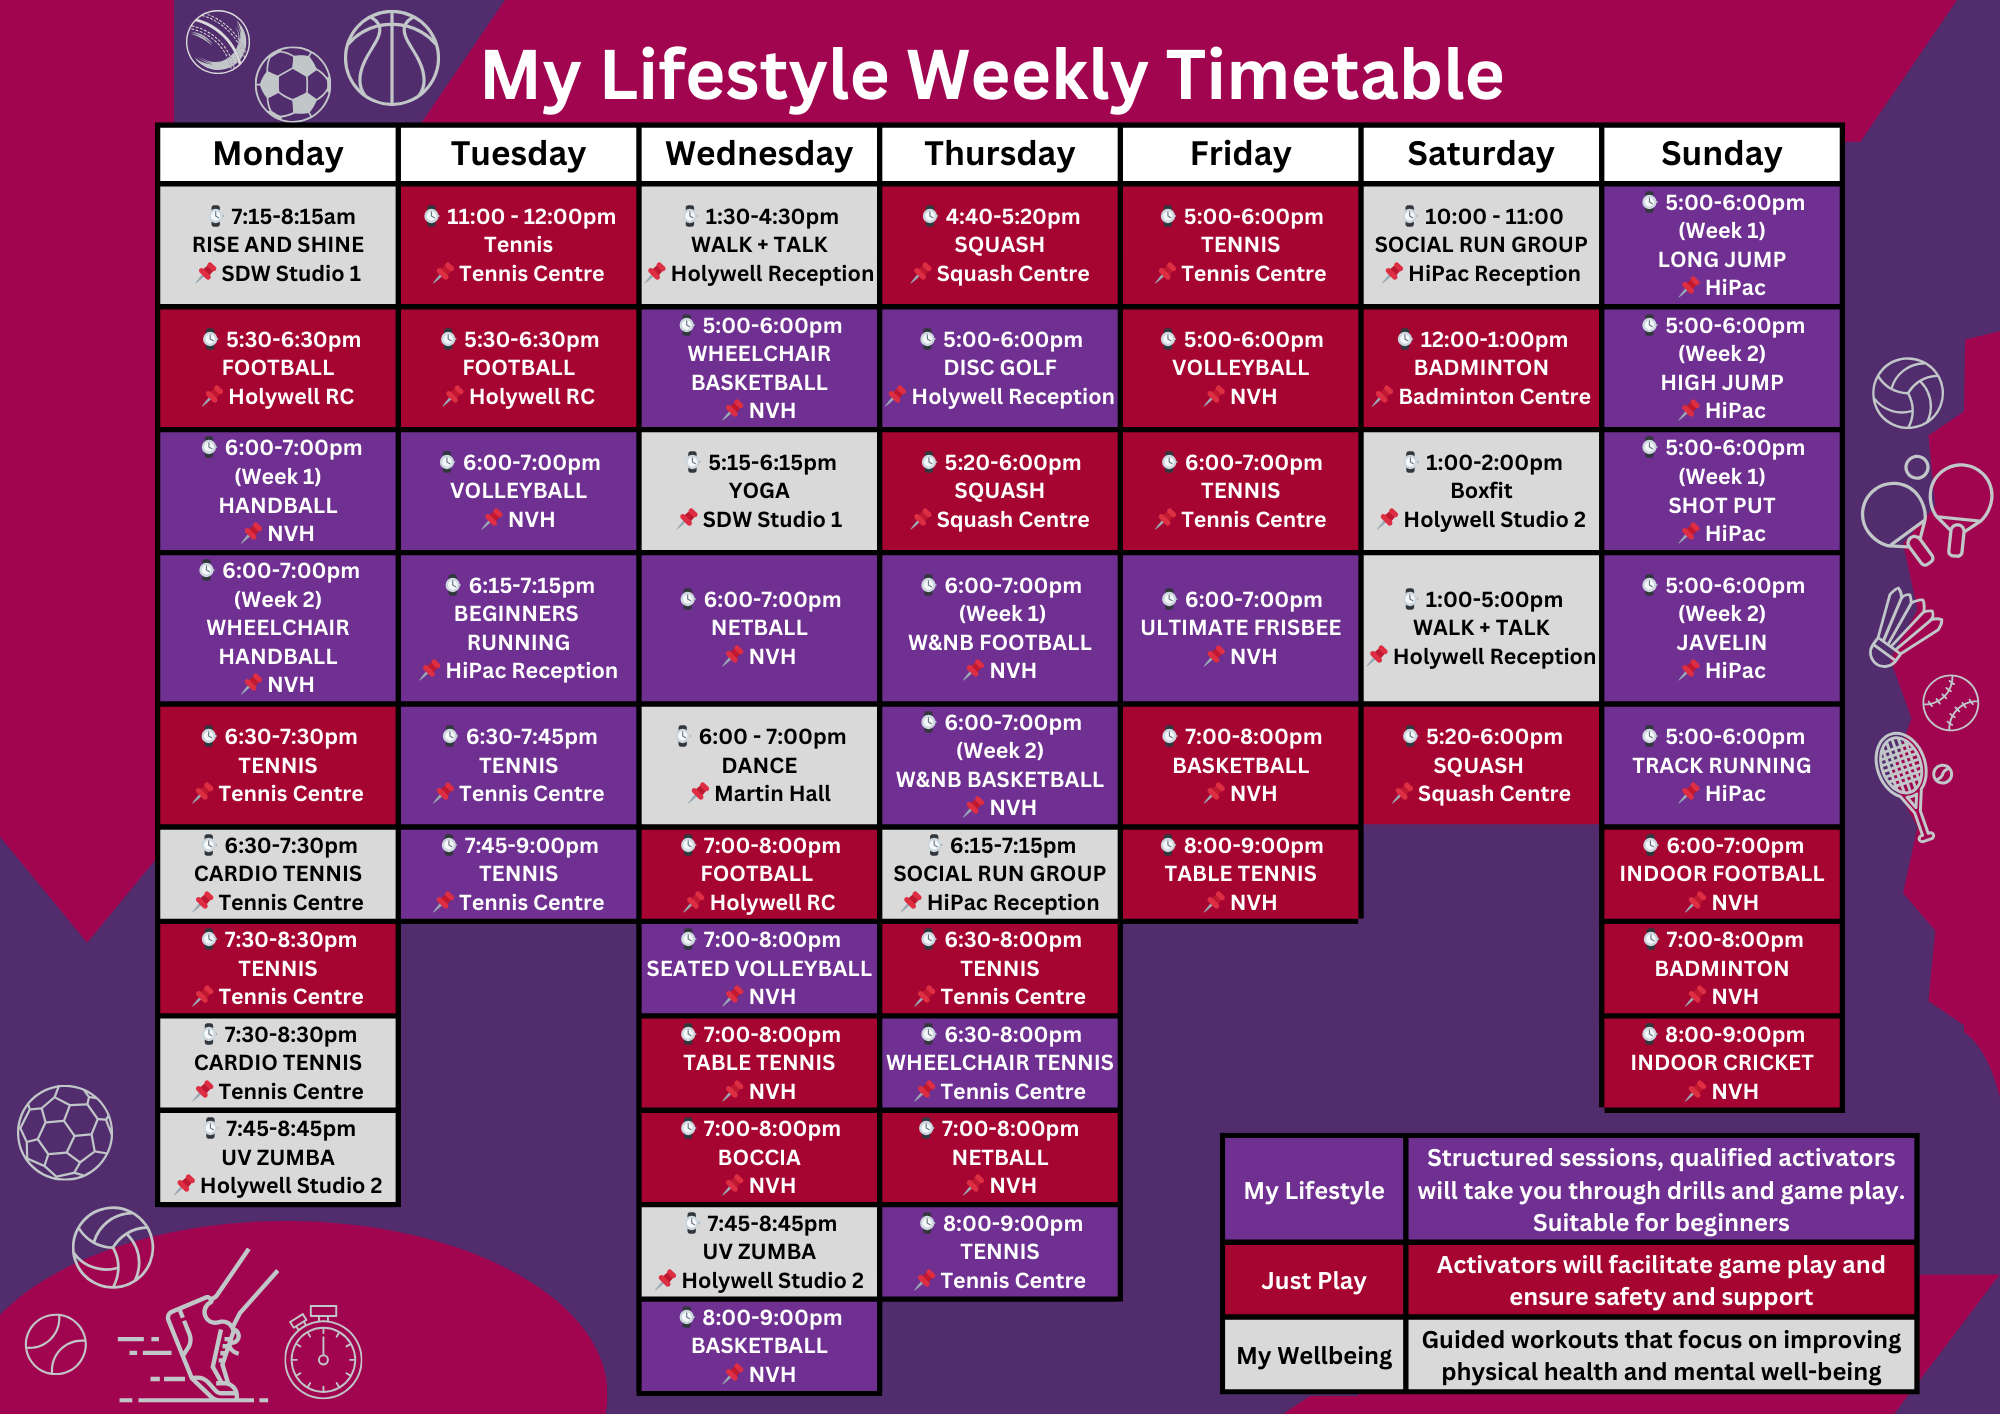 My Lifestyle Timetable with purple background and images of sports equipment on edge in grey. 